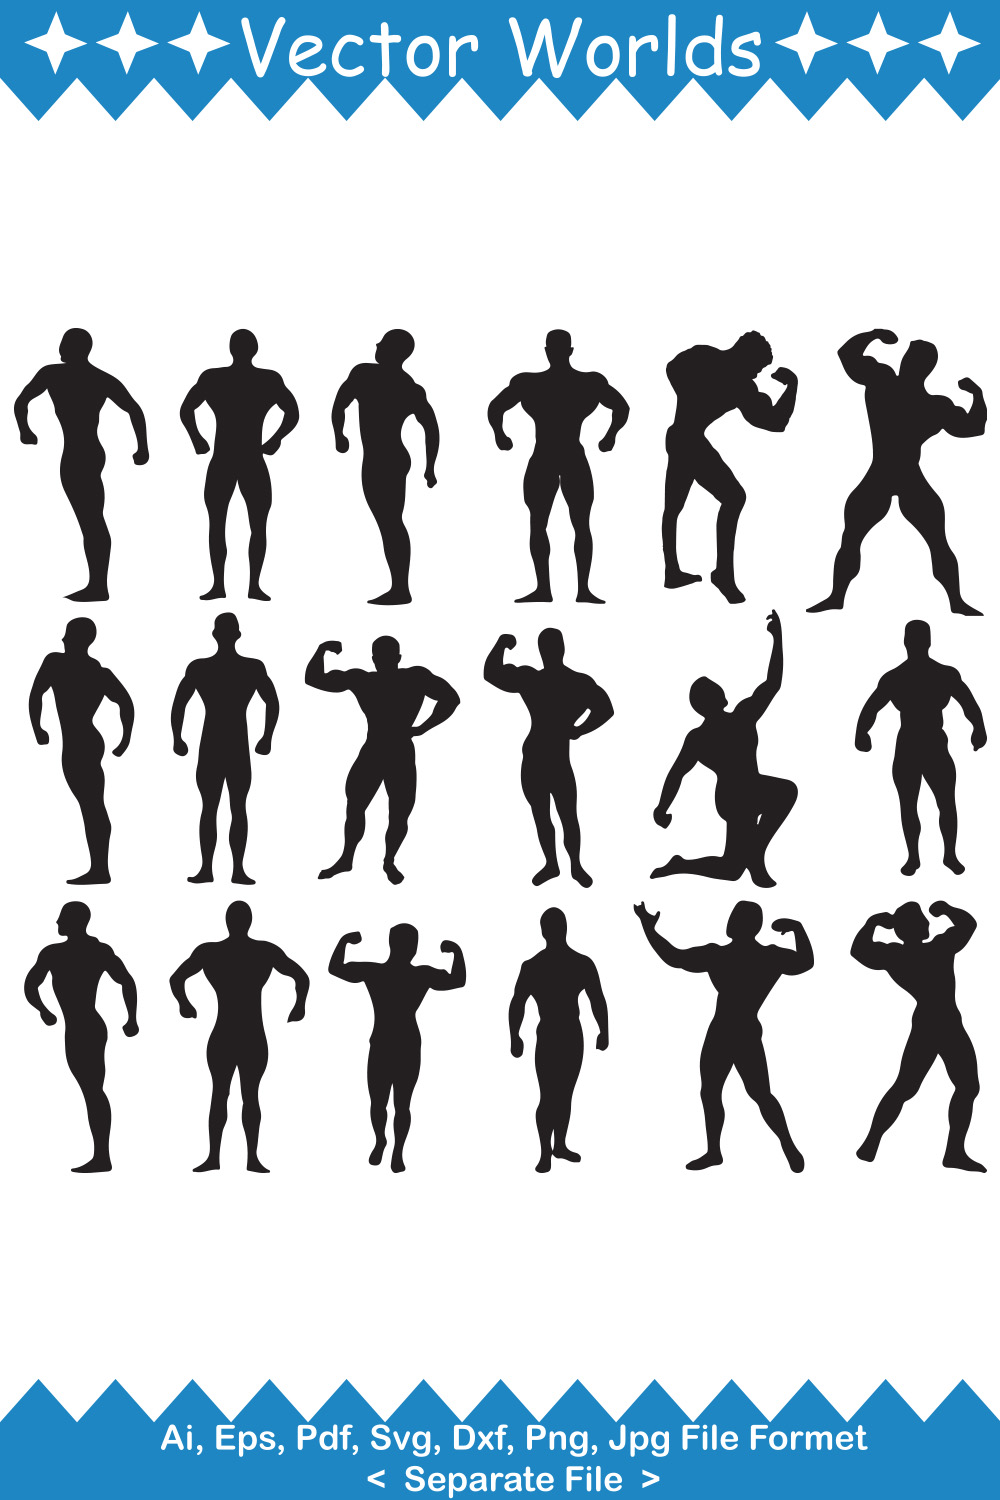 Bundle of vector exquisite images of a silhouette of a bodybuilder man.